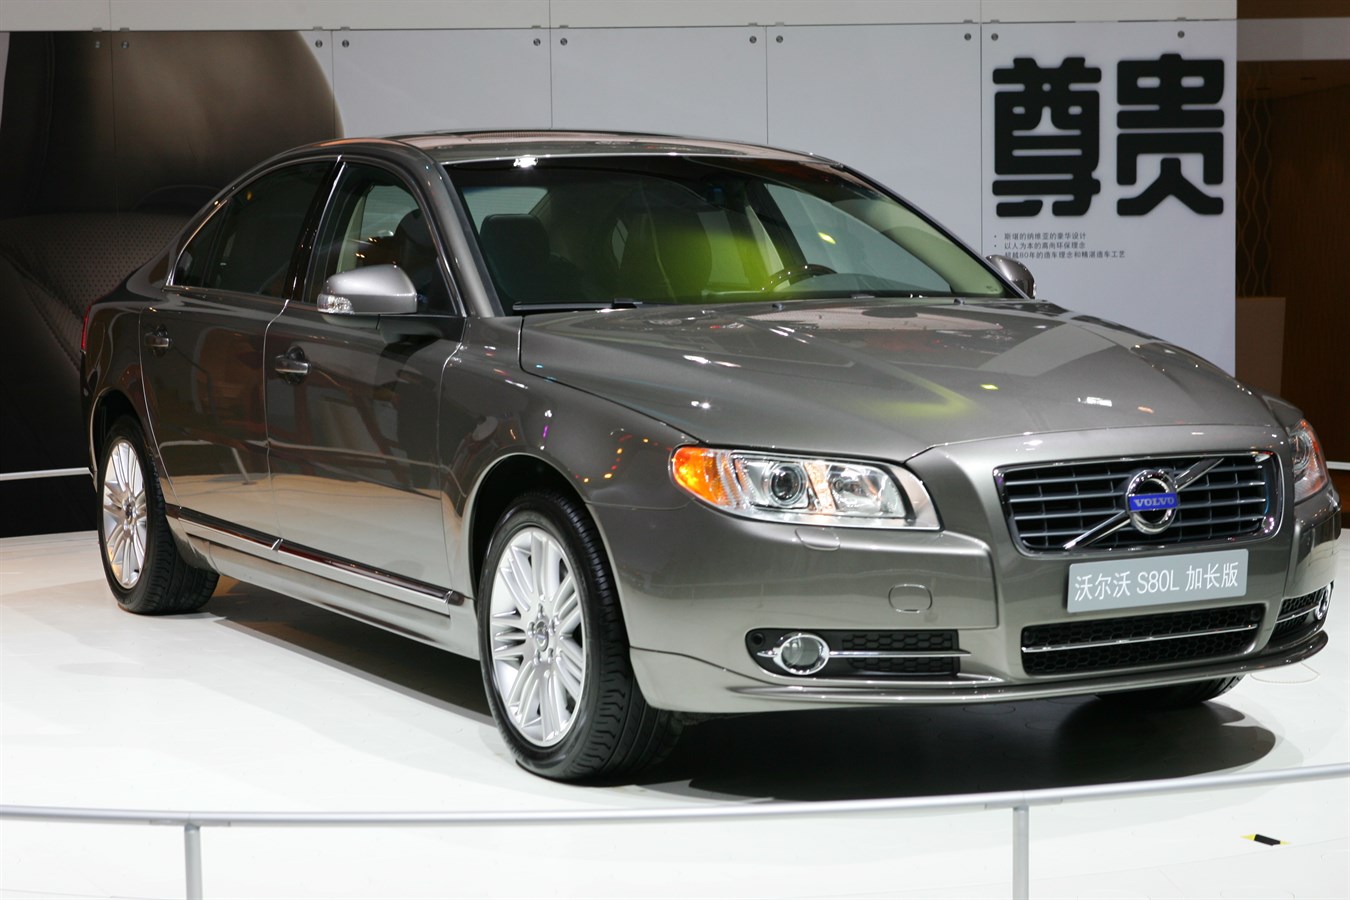 Volvo S80L - long wheelbase, built for the Chinese market (front7side)